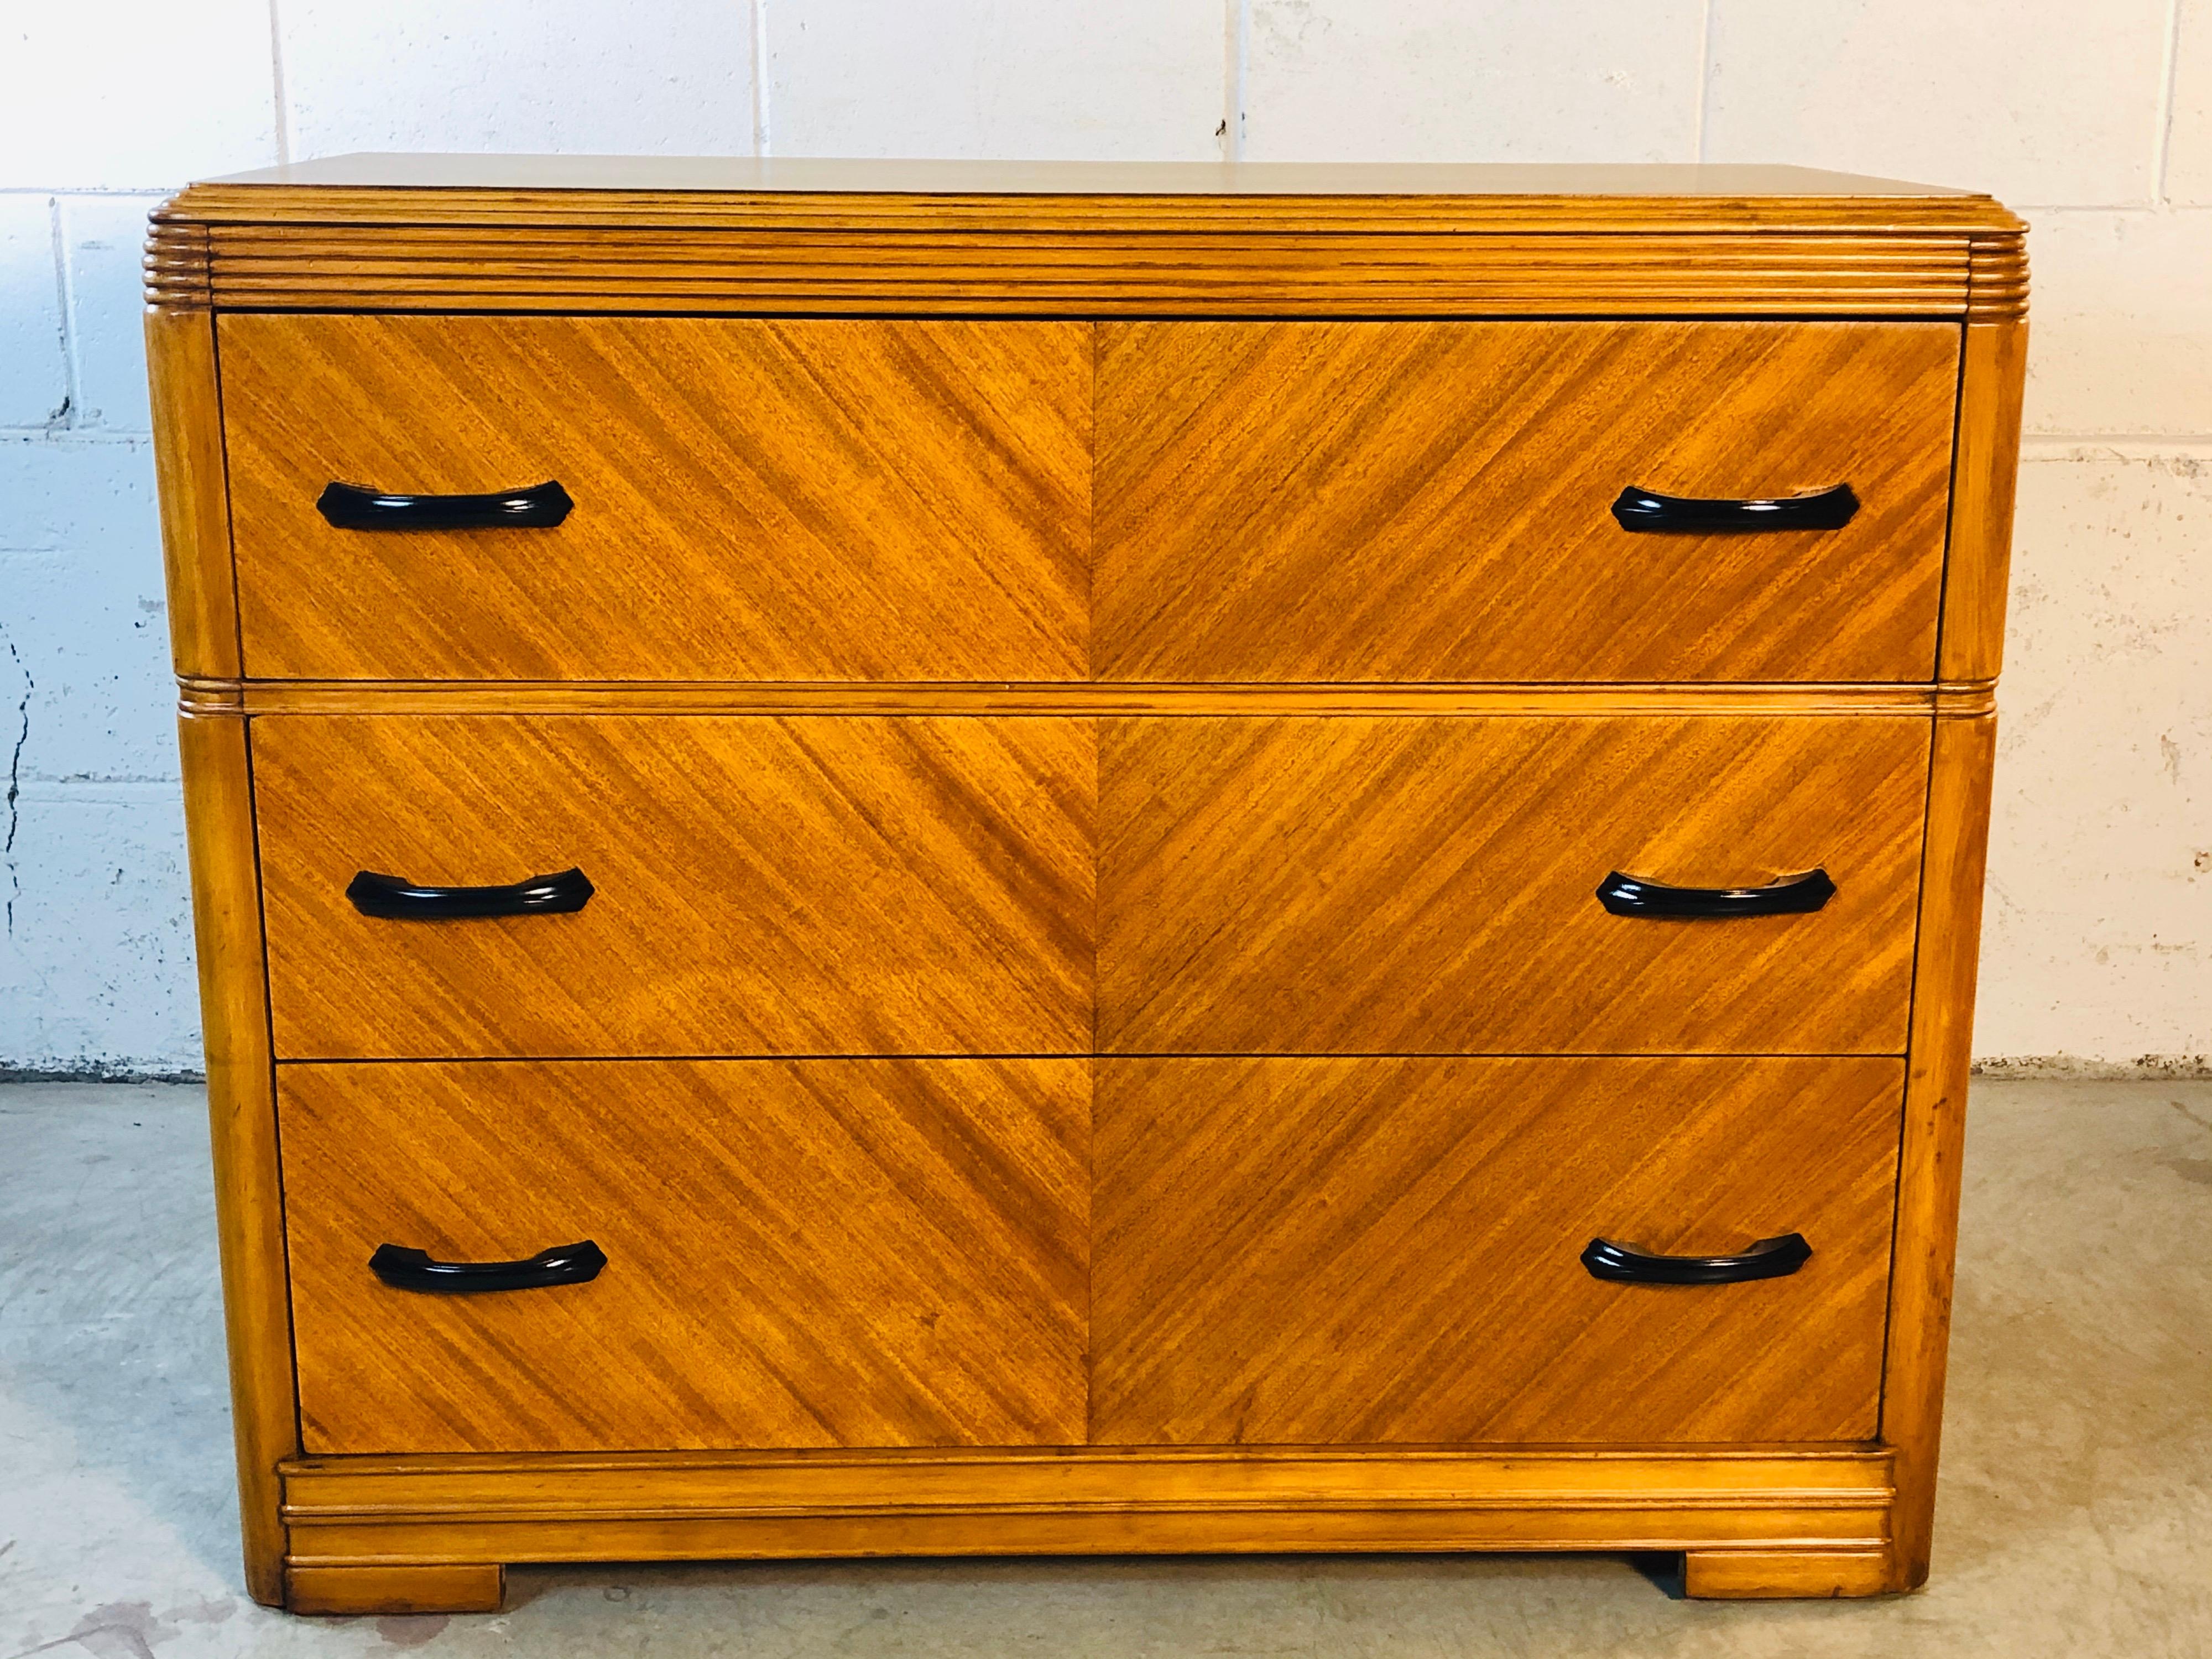 Art Deco matchbook veneer three drawer low dresser with black metal handles. The dresser has nice accents and is marked Huntley Furniture inside the drawer. The dresser is in refinished condition.